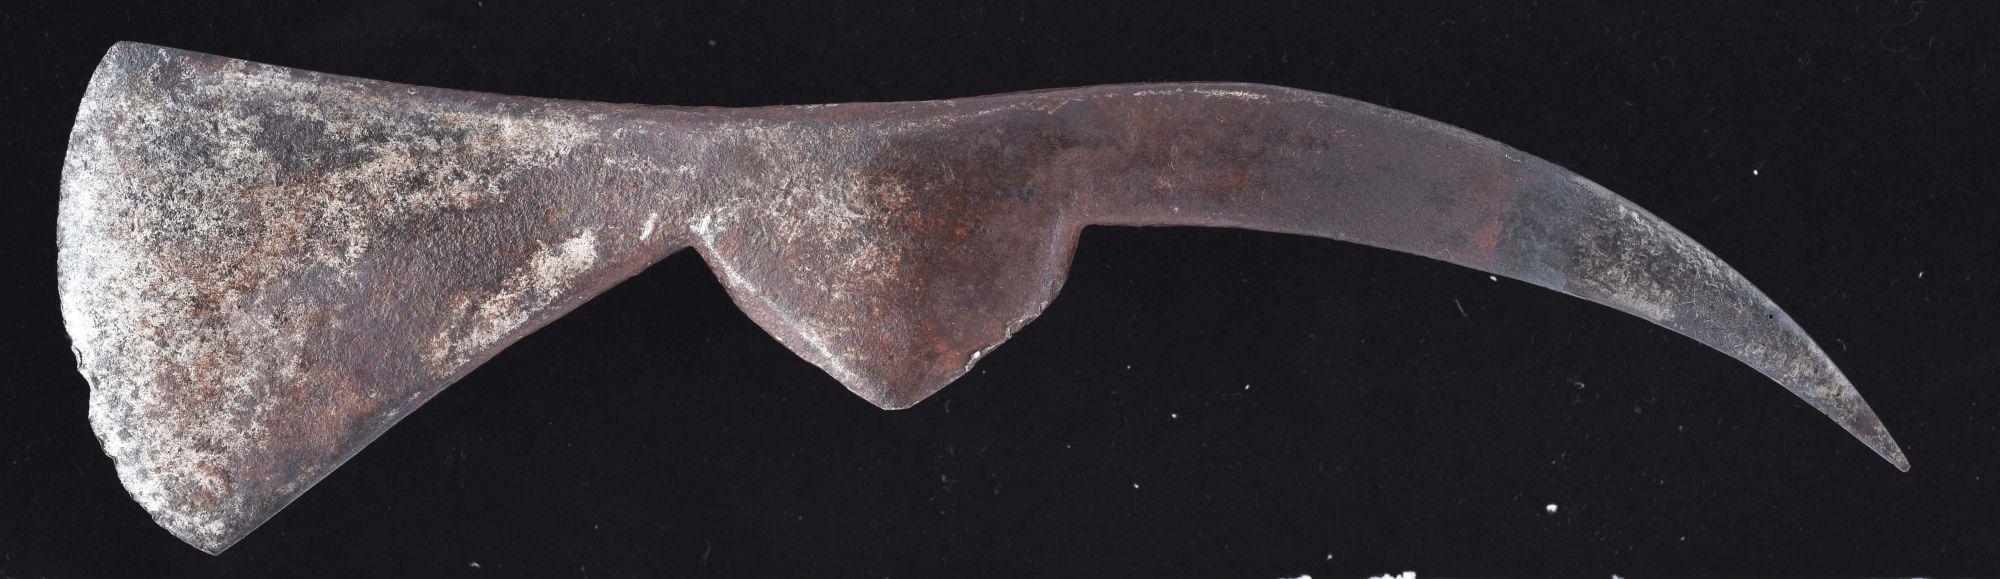 Large 18th Century Spike Tomahawk Head With Fort William Henry Provenance.